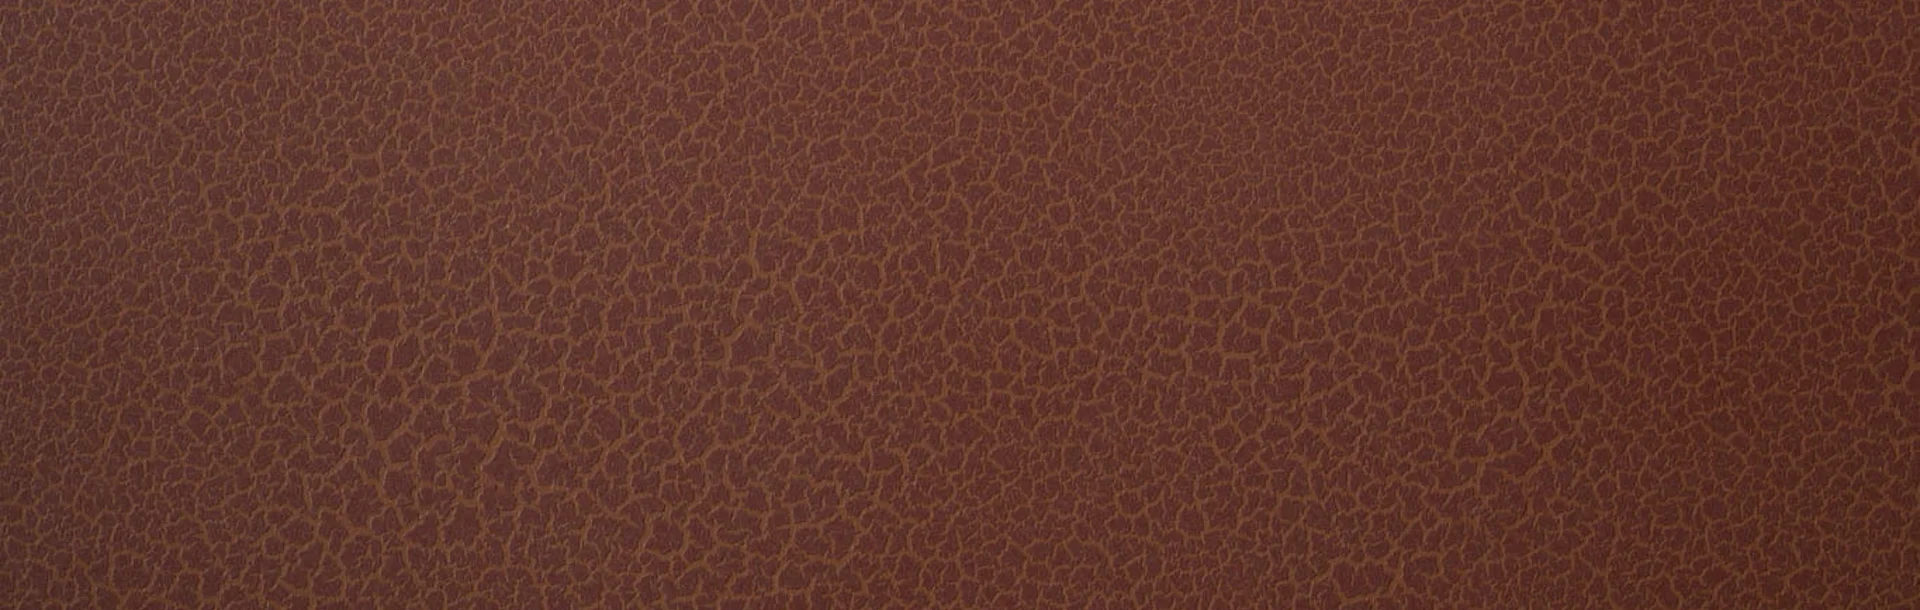 Leather effect (NEW) - Furniture surface effects